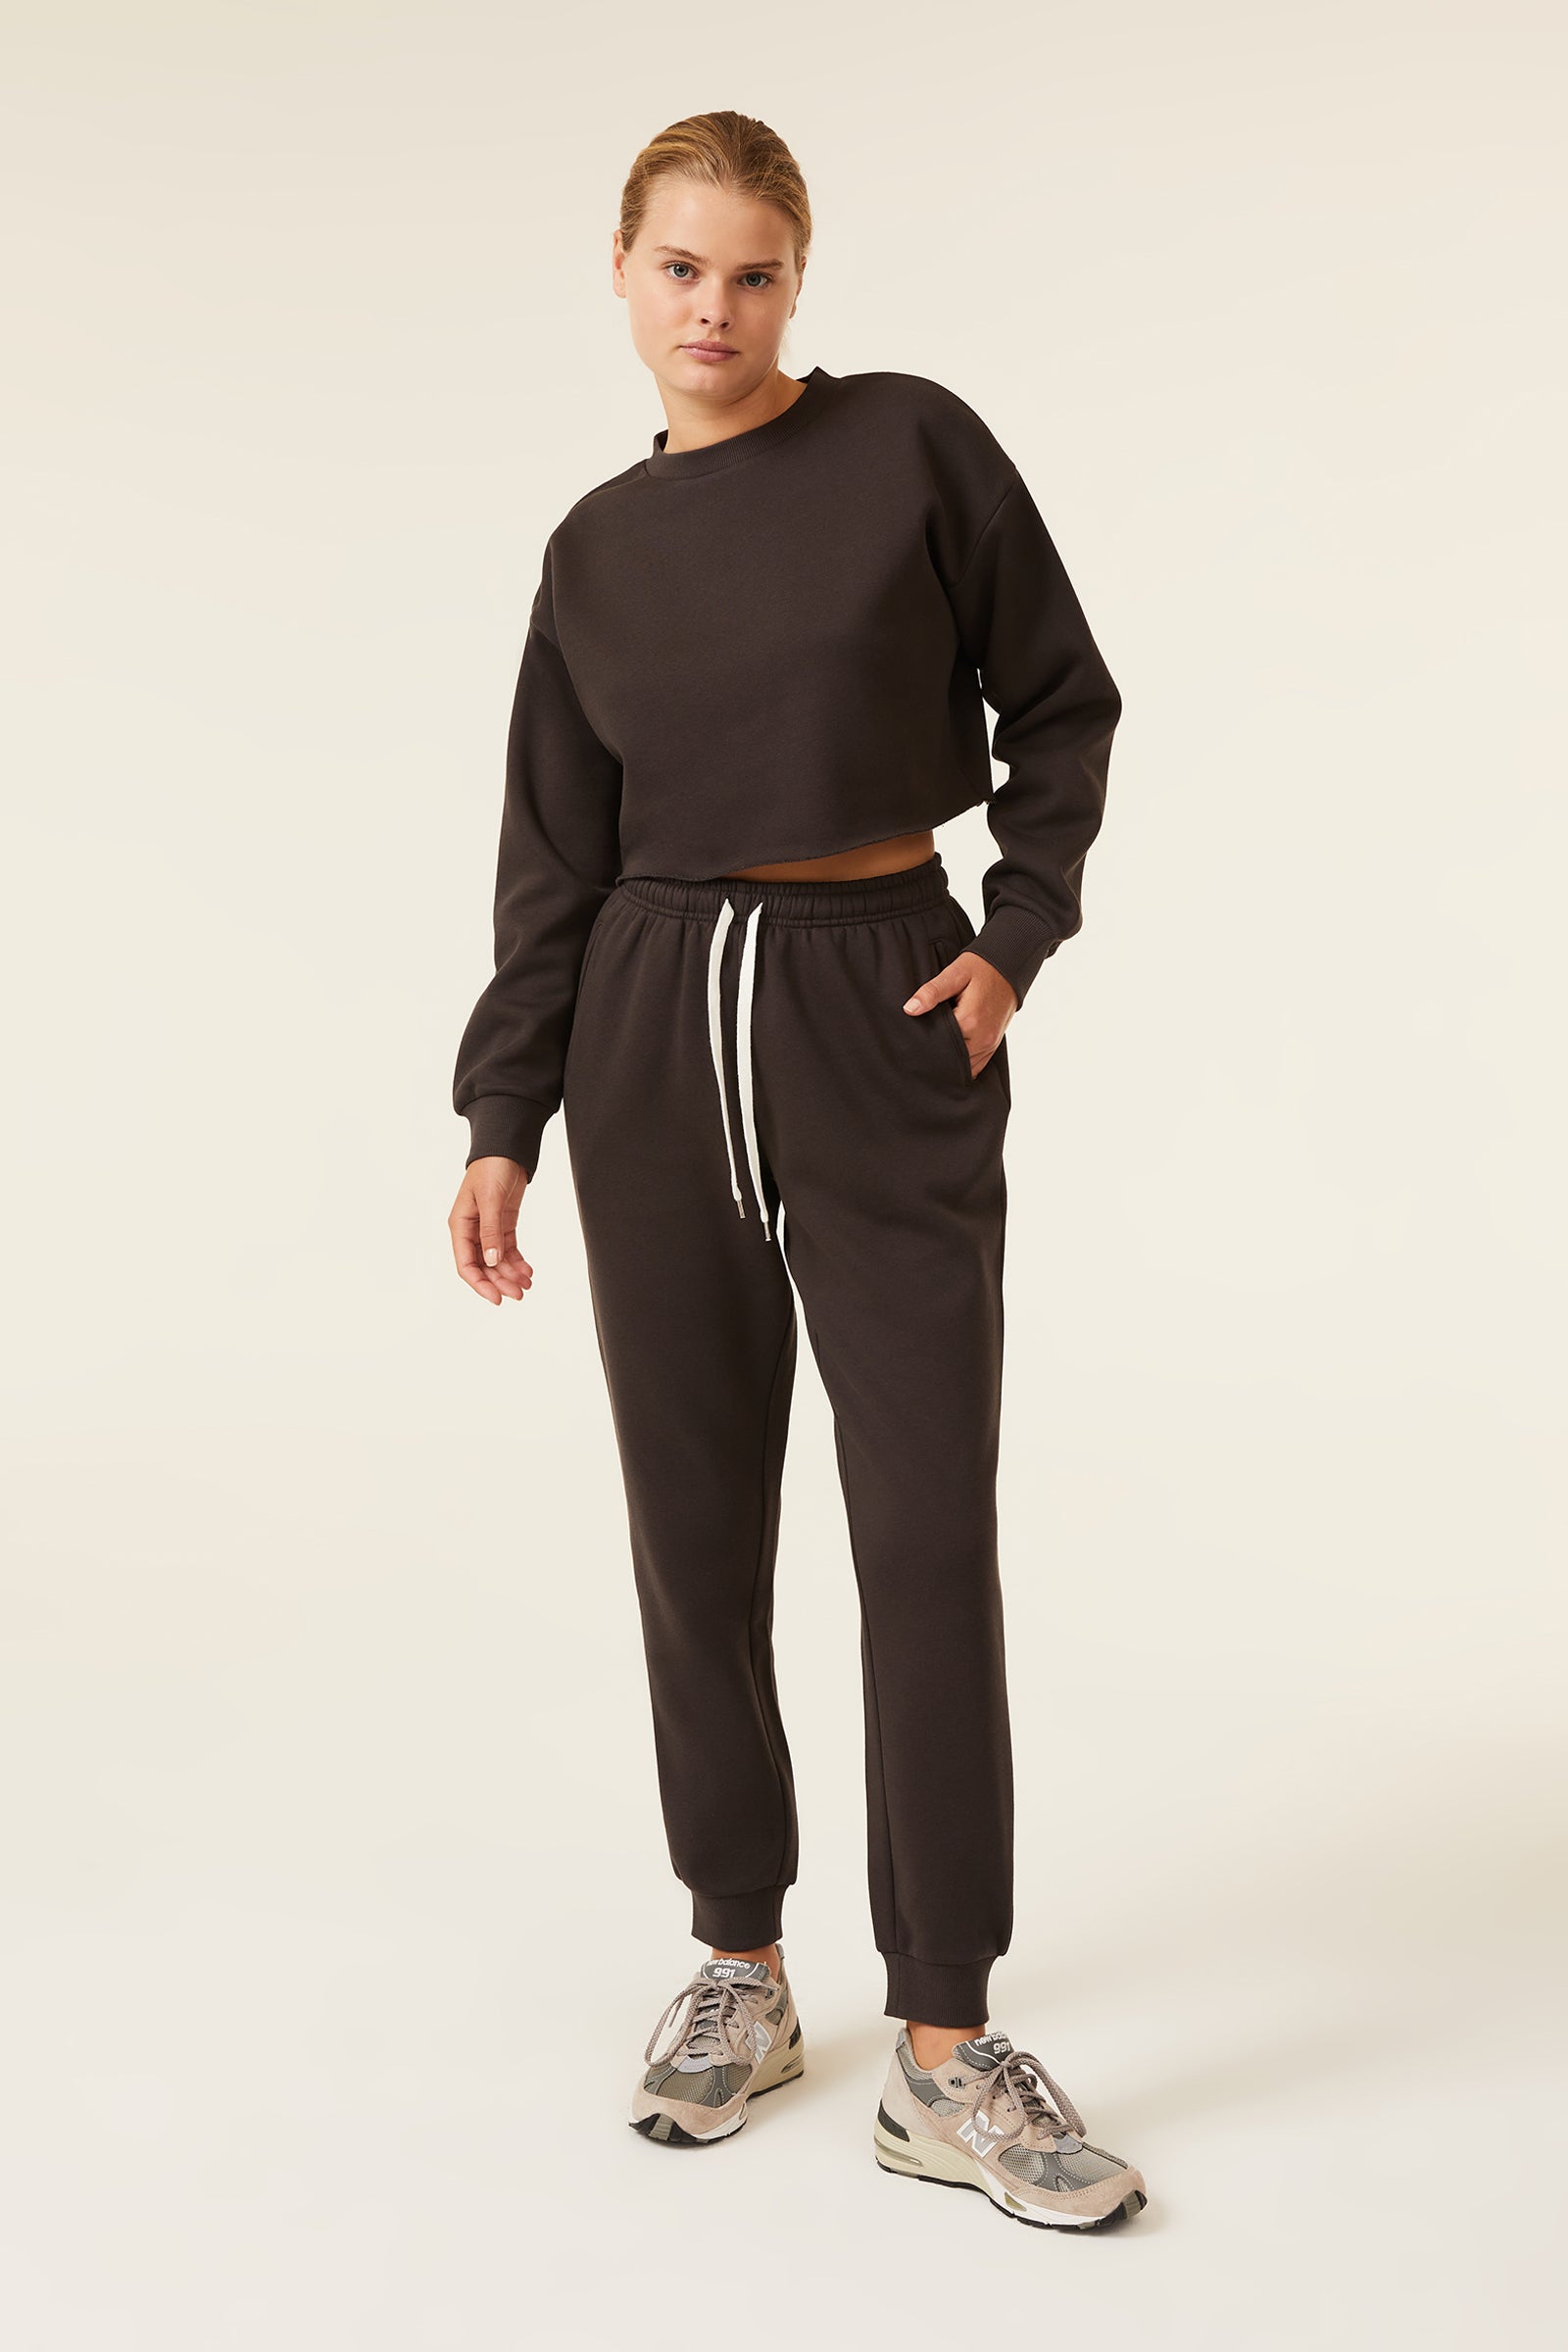 Nude Lucy Carter Classic Crop Sweat In A Brown Coal Colour 